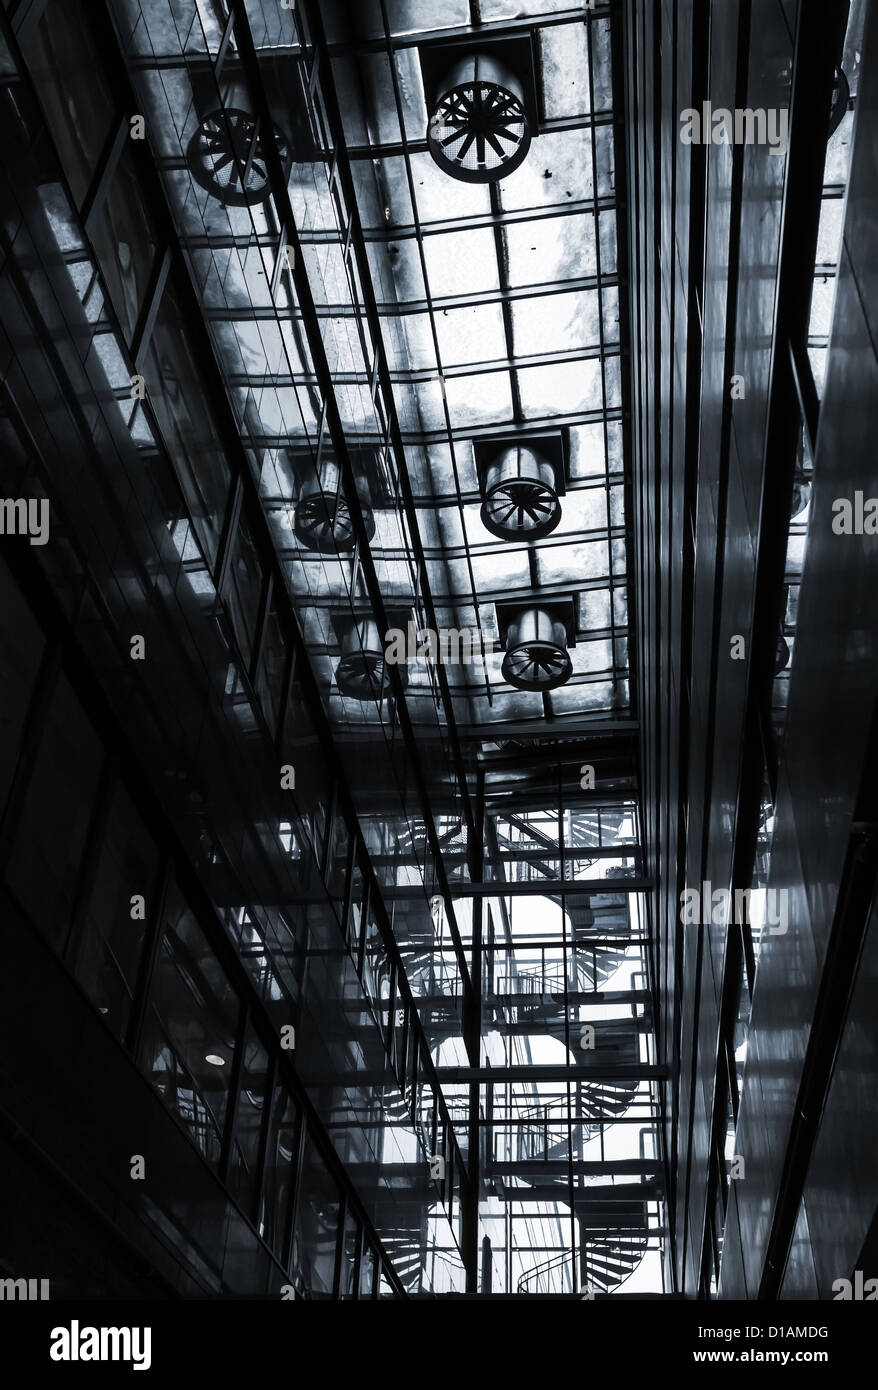 Dark abstract industrial interior with transparent ceiling, ventilation and spiral stairs Stock Photo